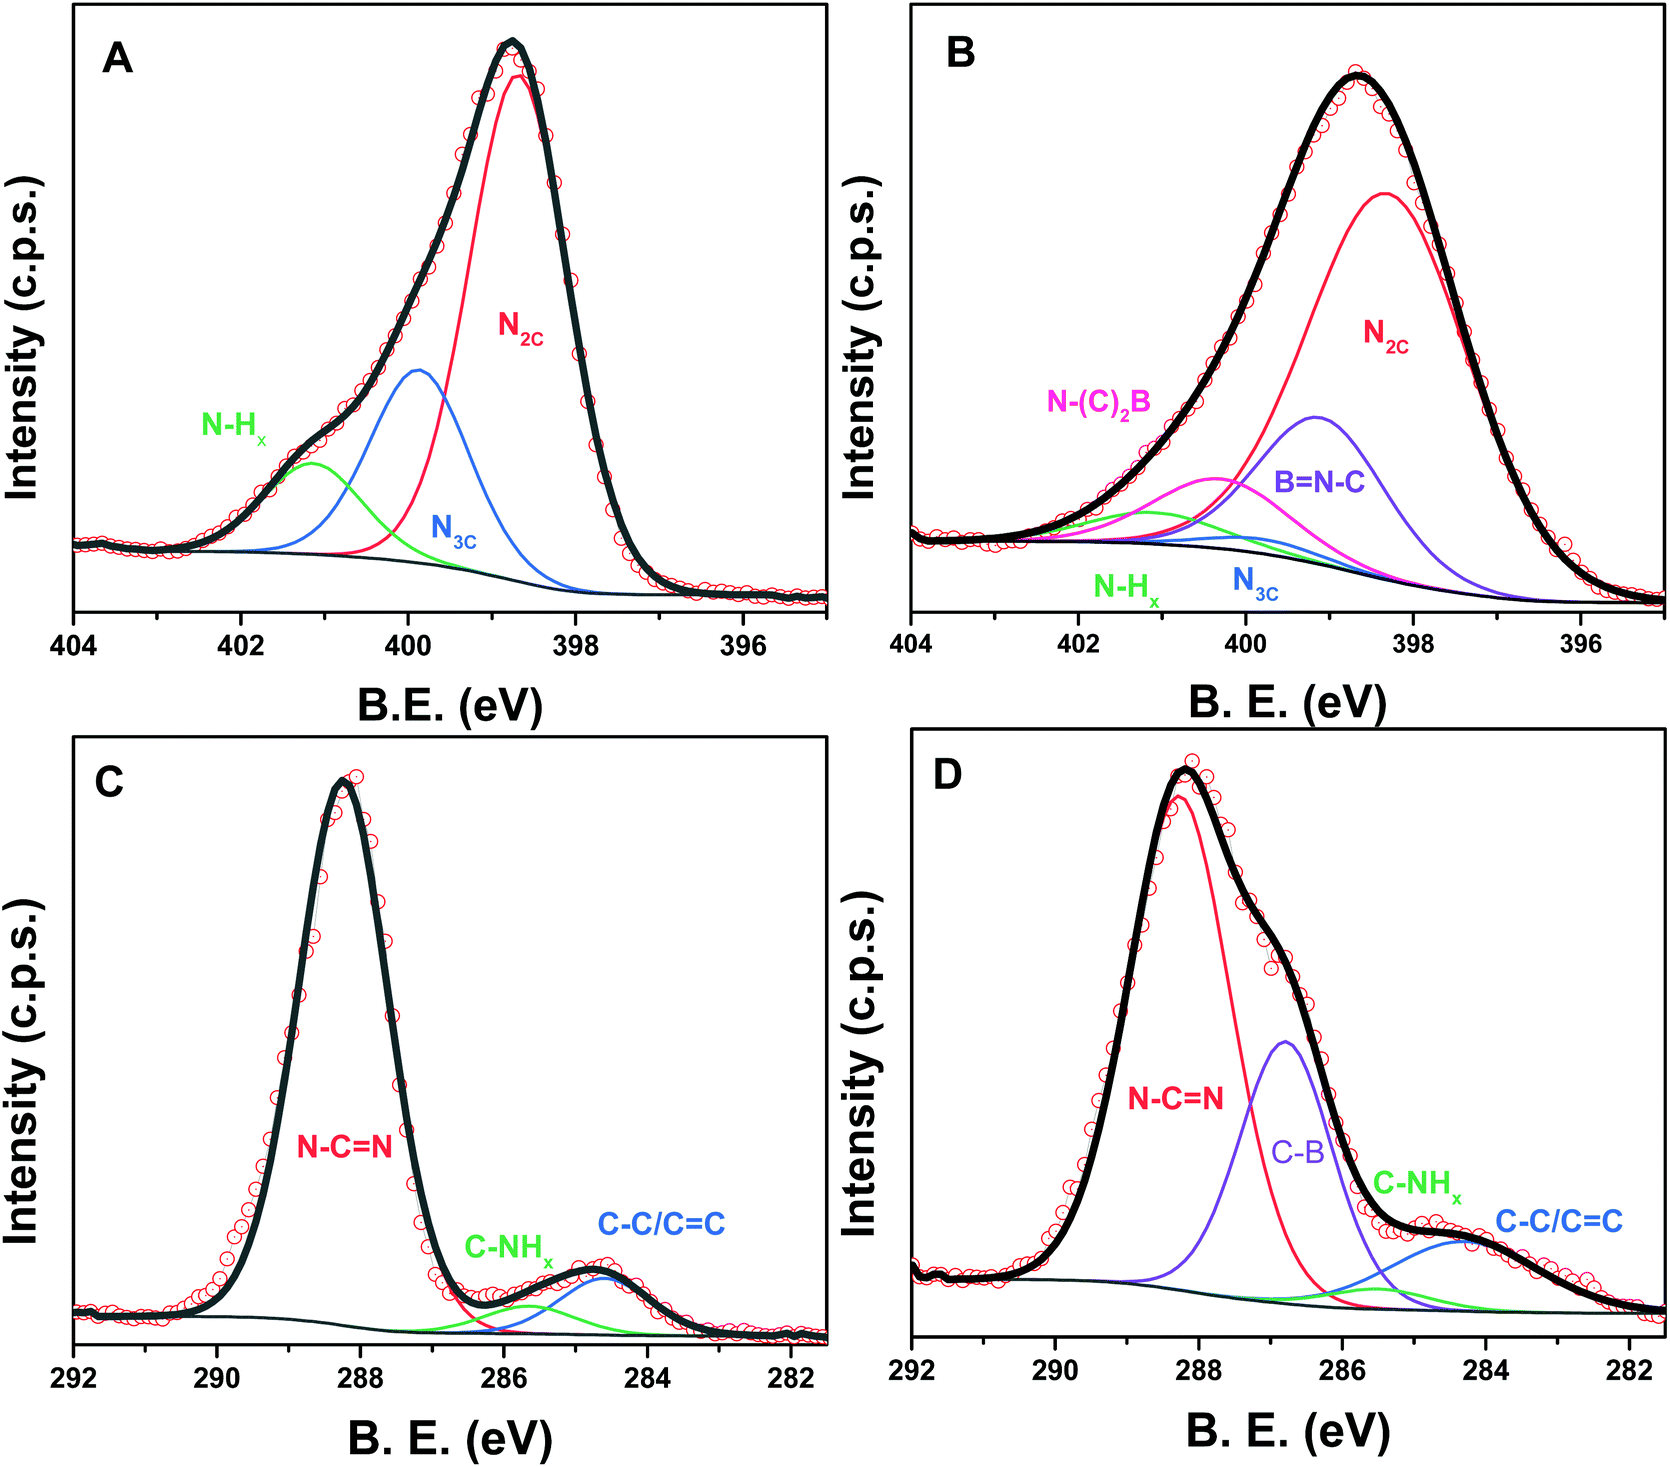 Facile Synthesis Of B G C 3 N 4 Composite Materials For The Continuous Flow Selective Photo Production Of Acetone Green Chemistry Rsc Publishing Doi 10 1039 D0gca